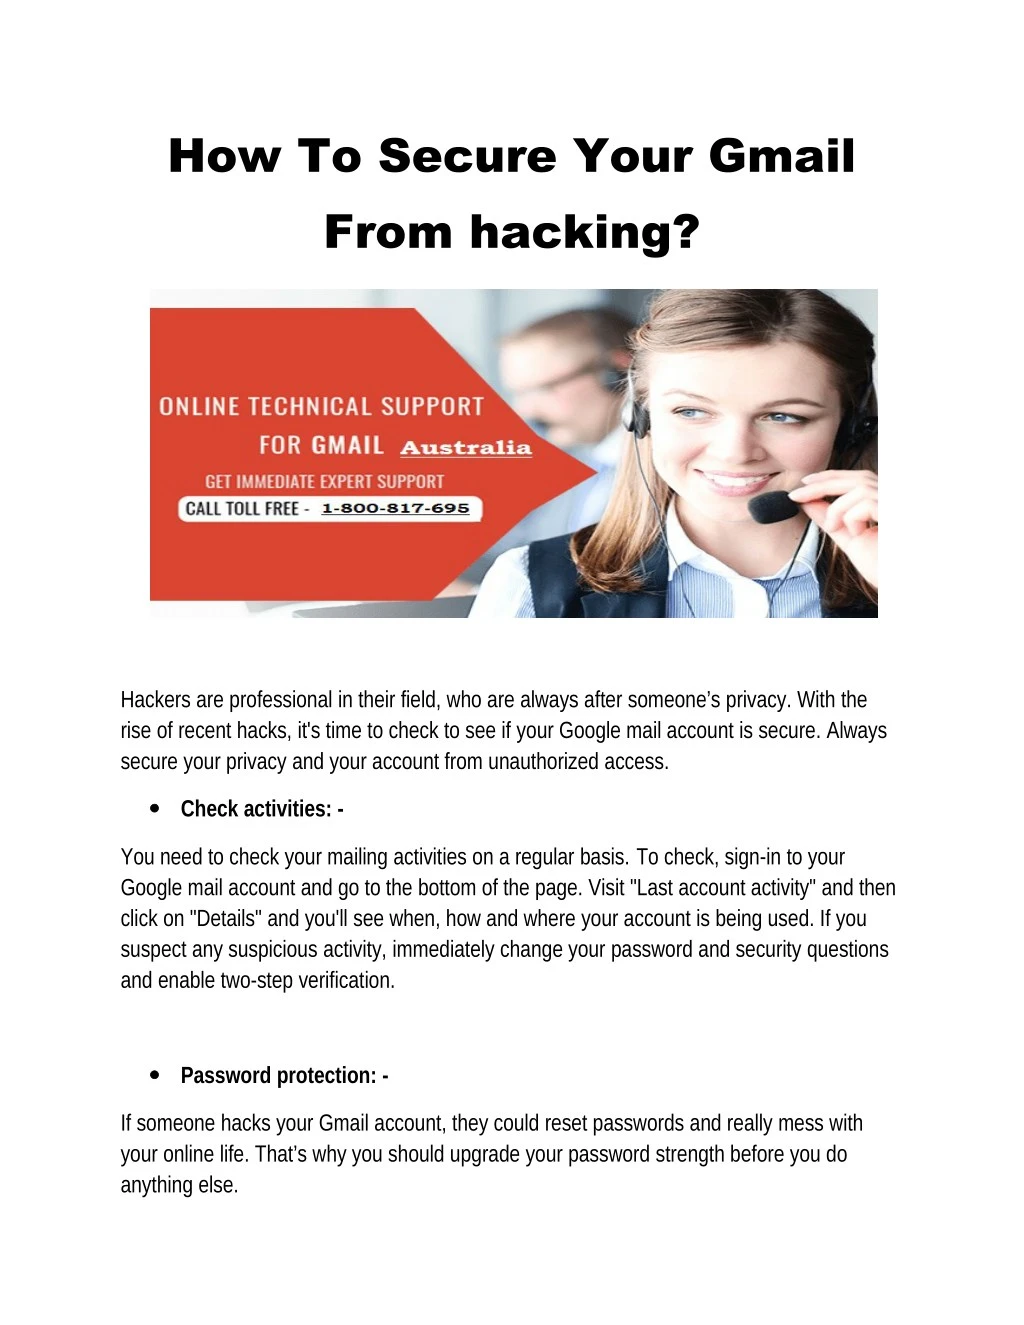 how to secure your gmail from hacking